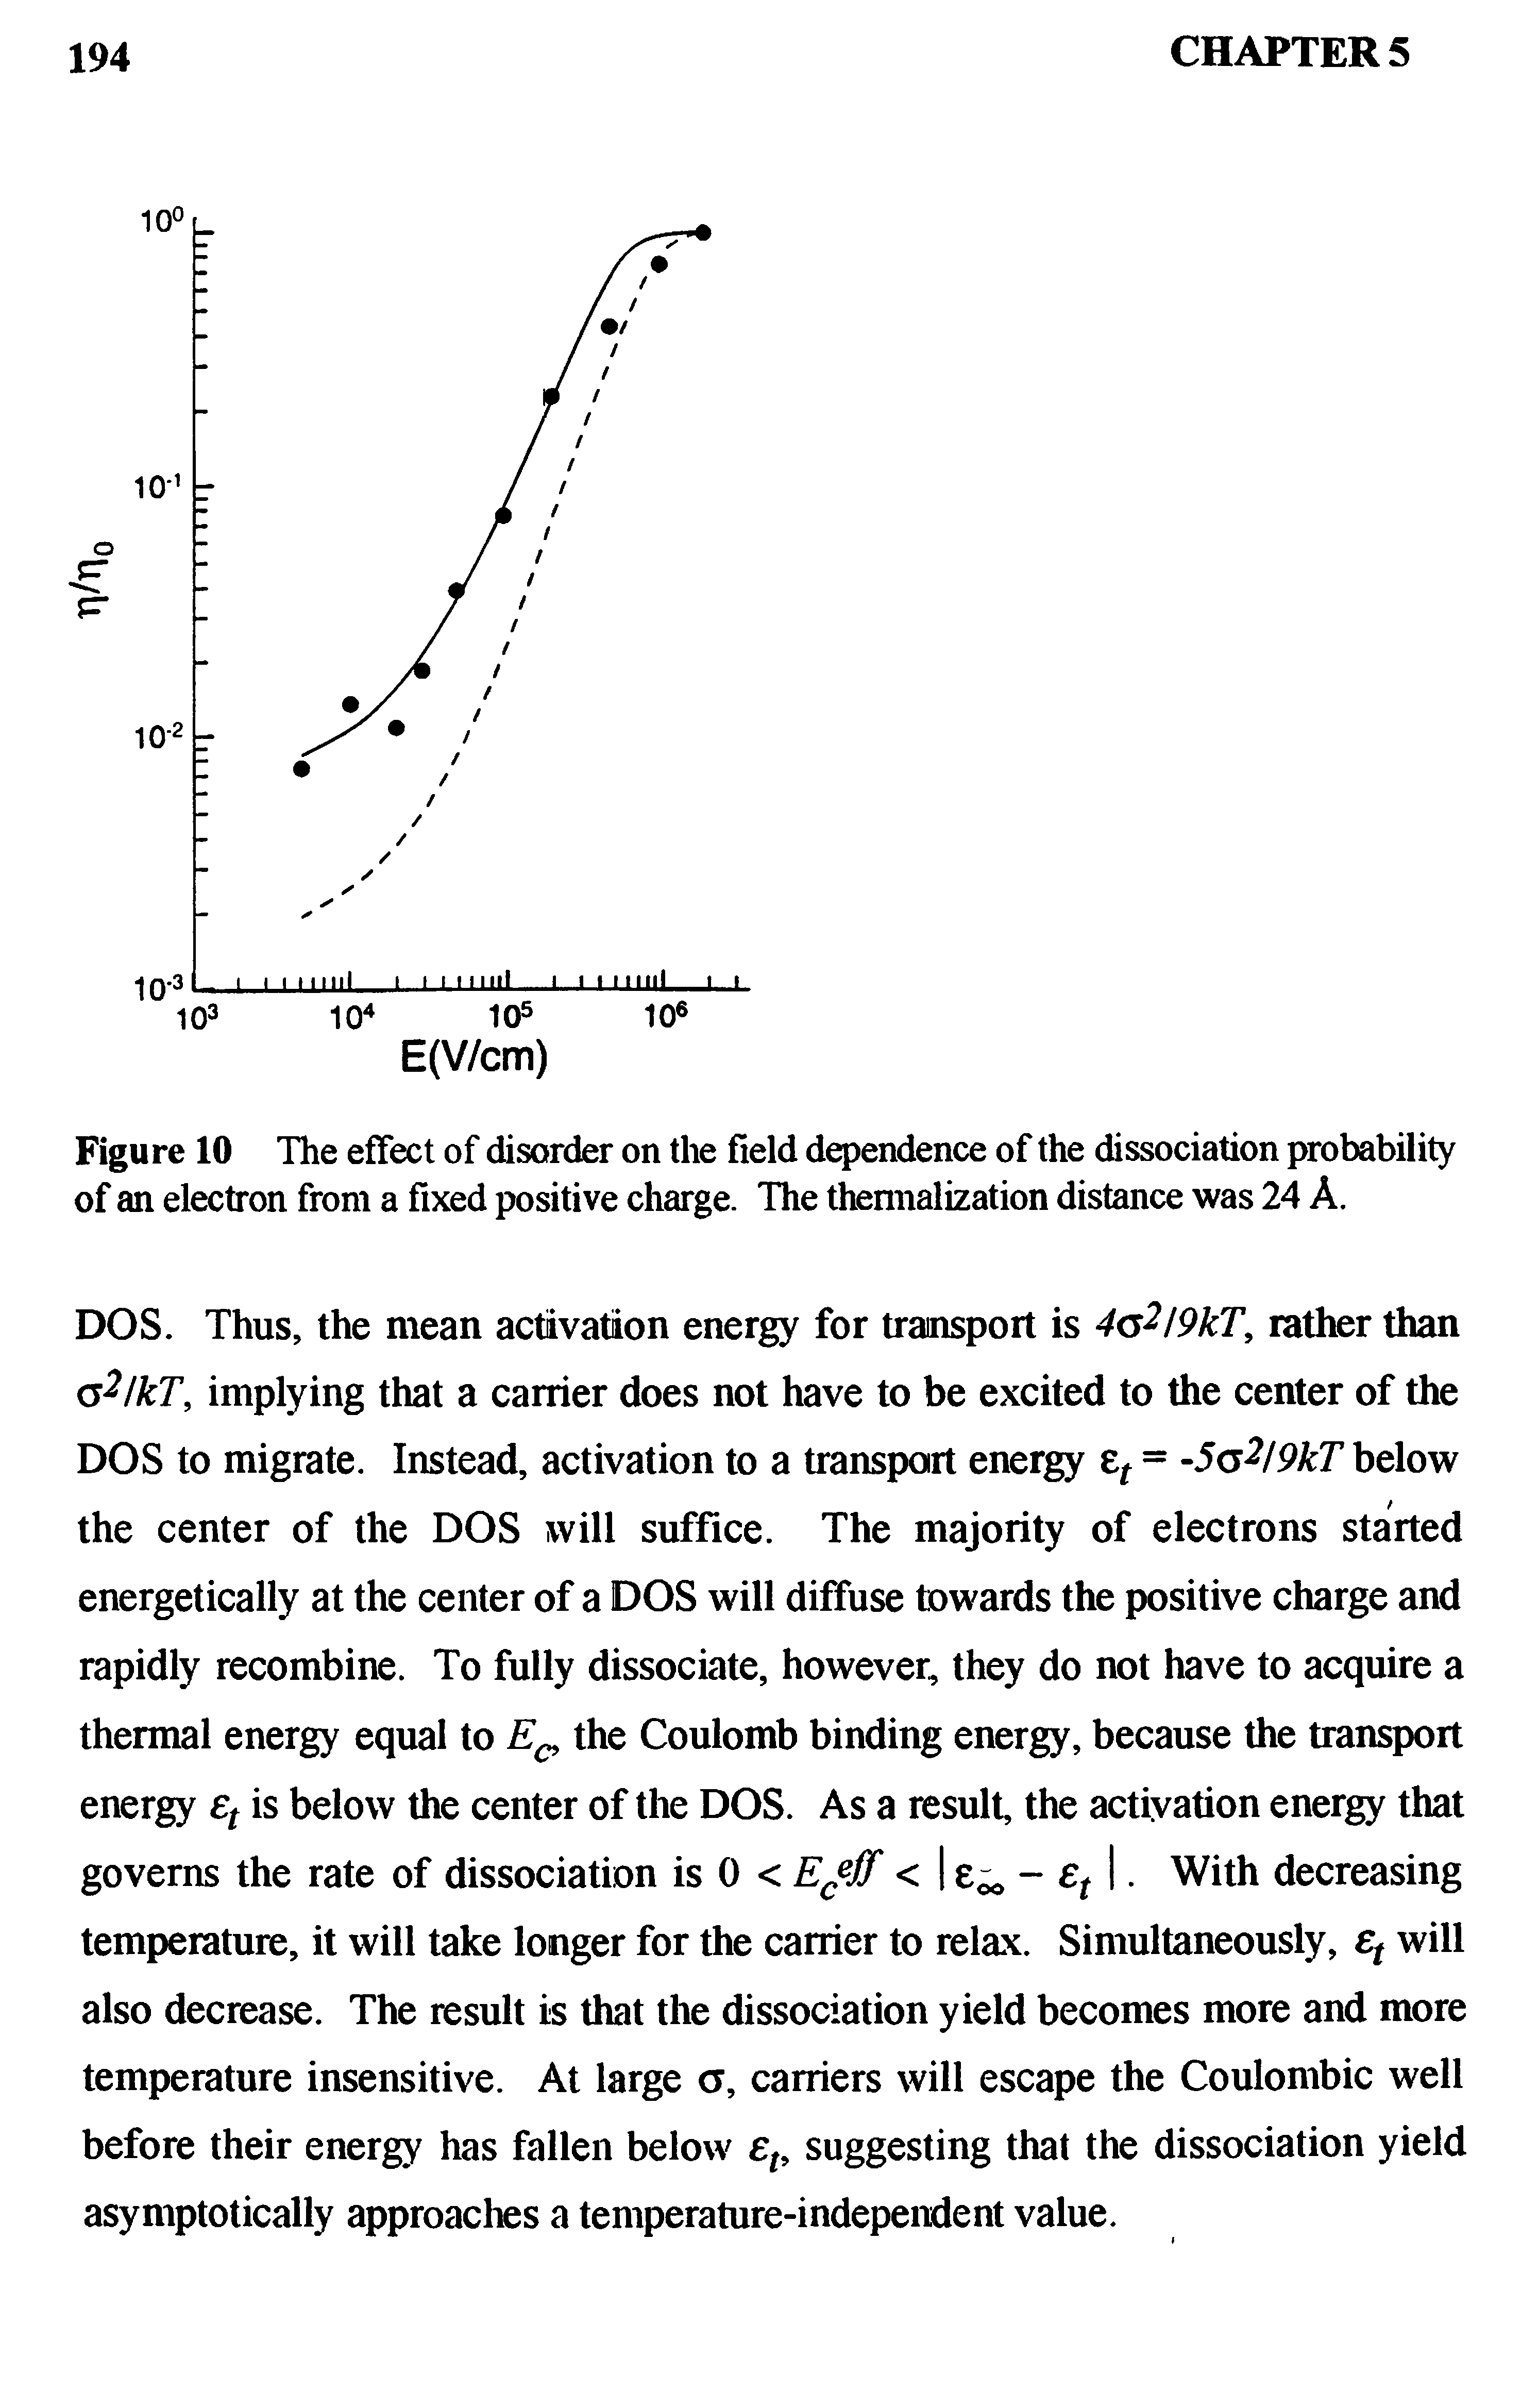 Figure 10 The effect of disorder on the field dependence of the dissociation probability of an electron from a fixed positive charge. The thennalization distance was 24 A.